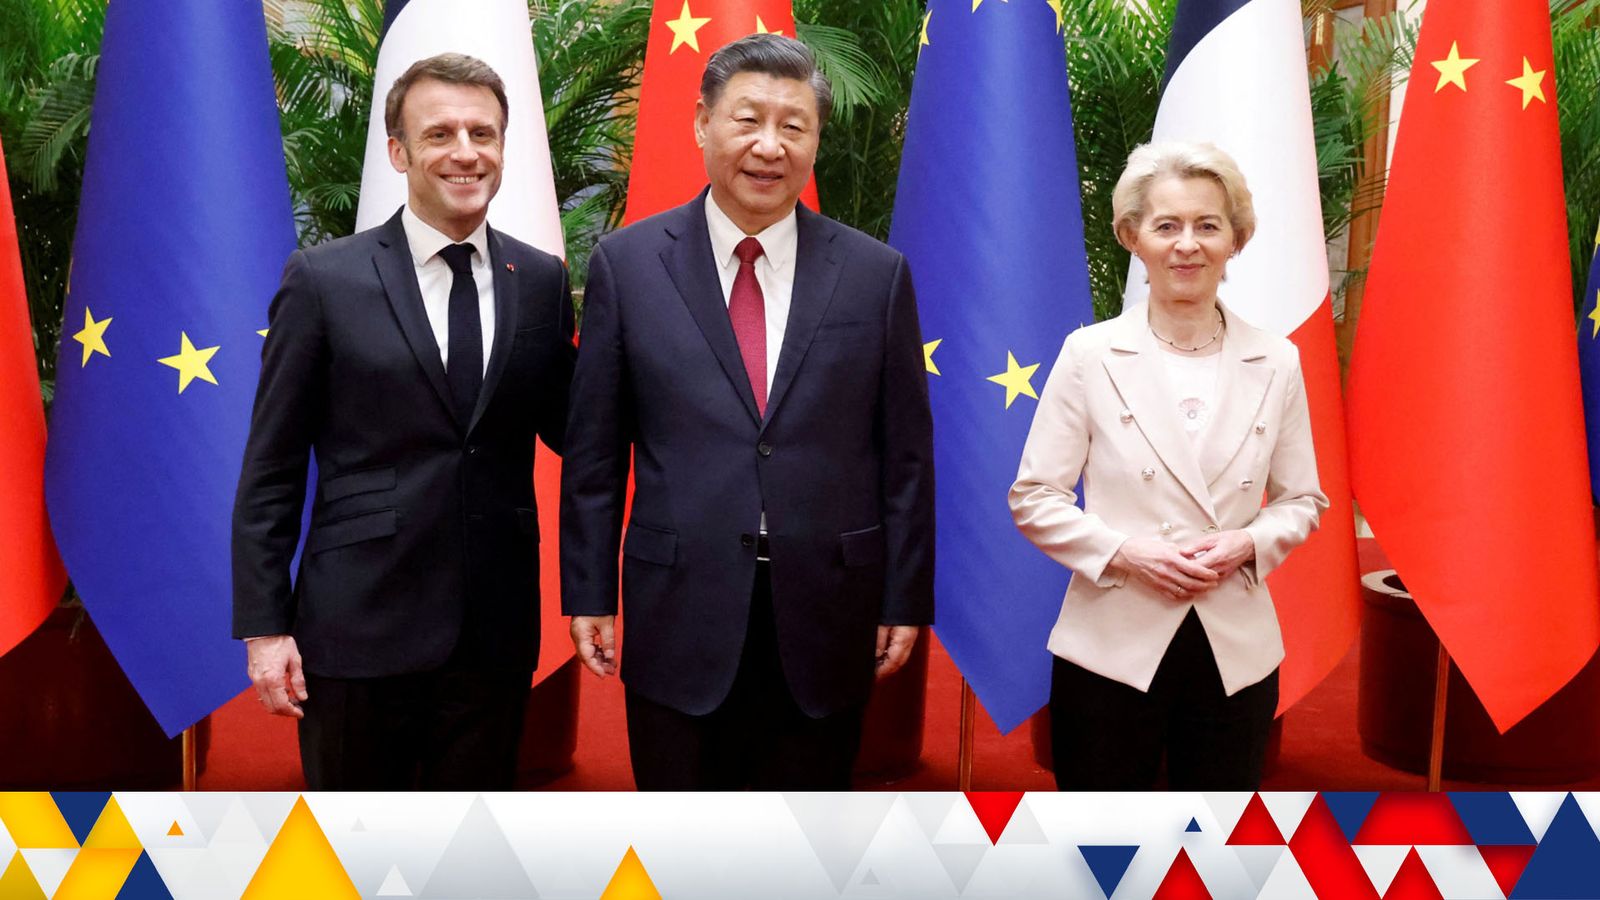 Macron appeals to China's Xi to 'bring Russia back to its senses' over Ukraine invasion